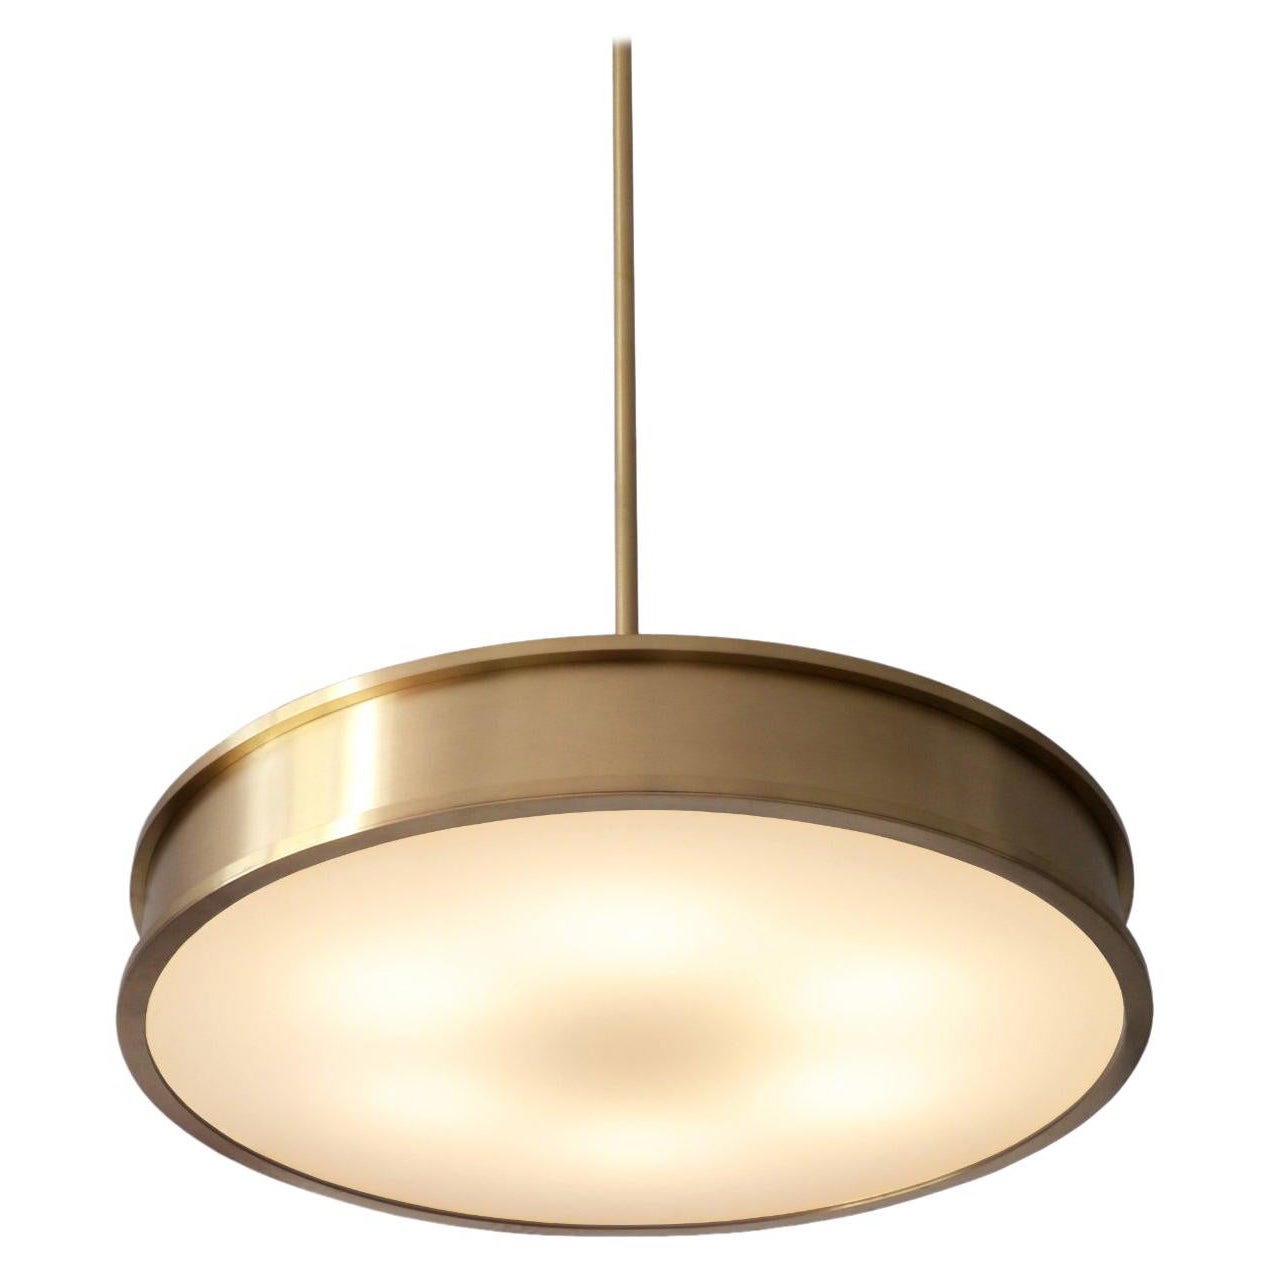 Bespoke Modernist Circular Pendant Light in Brushed Brass and Opal Glass, 2018 For Sale